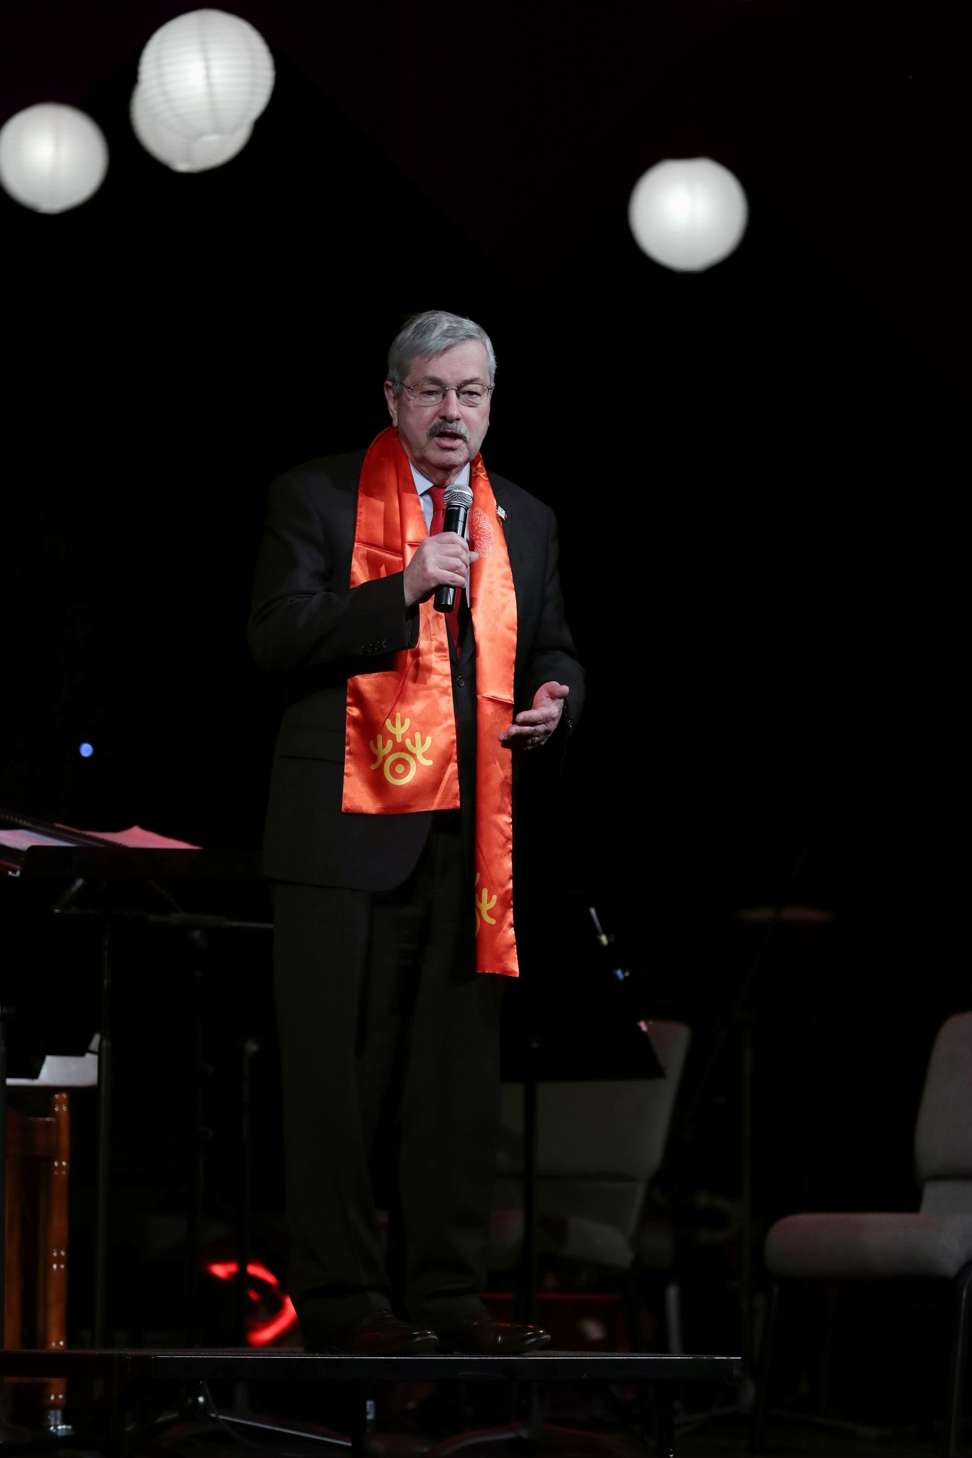 Iowa Governer Terry Branstad, soon to be America’s ambassador to China, speaks at a Lunar New Year concert in Muscatine, Iowa, last month. Photo: Xinhua